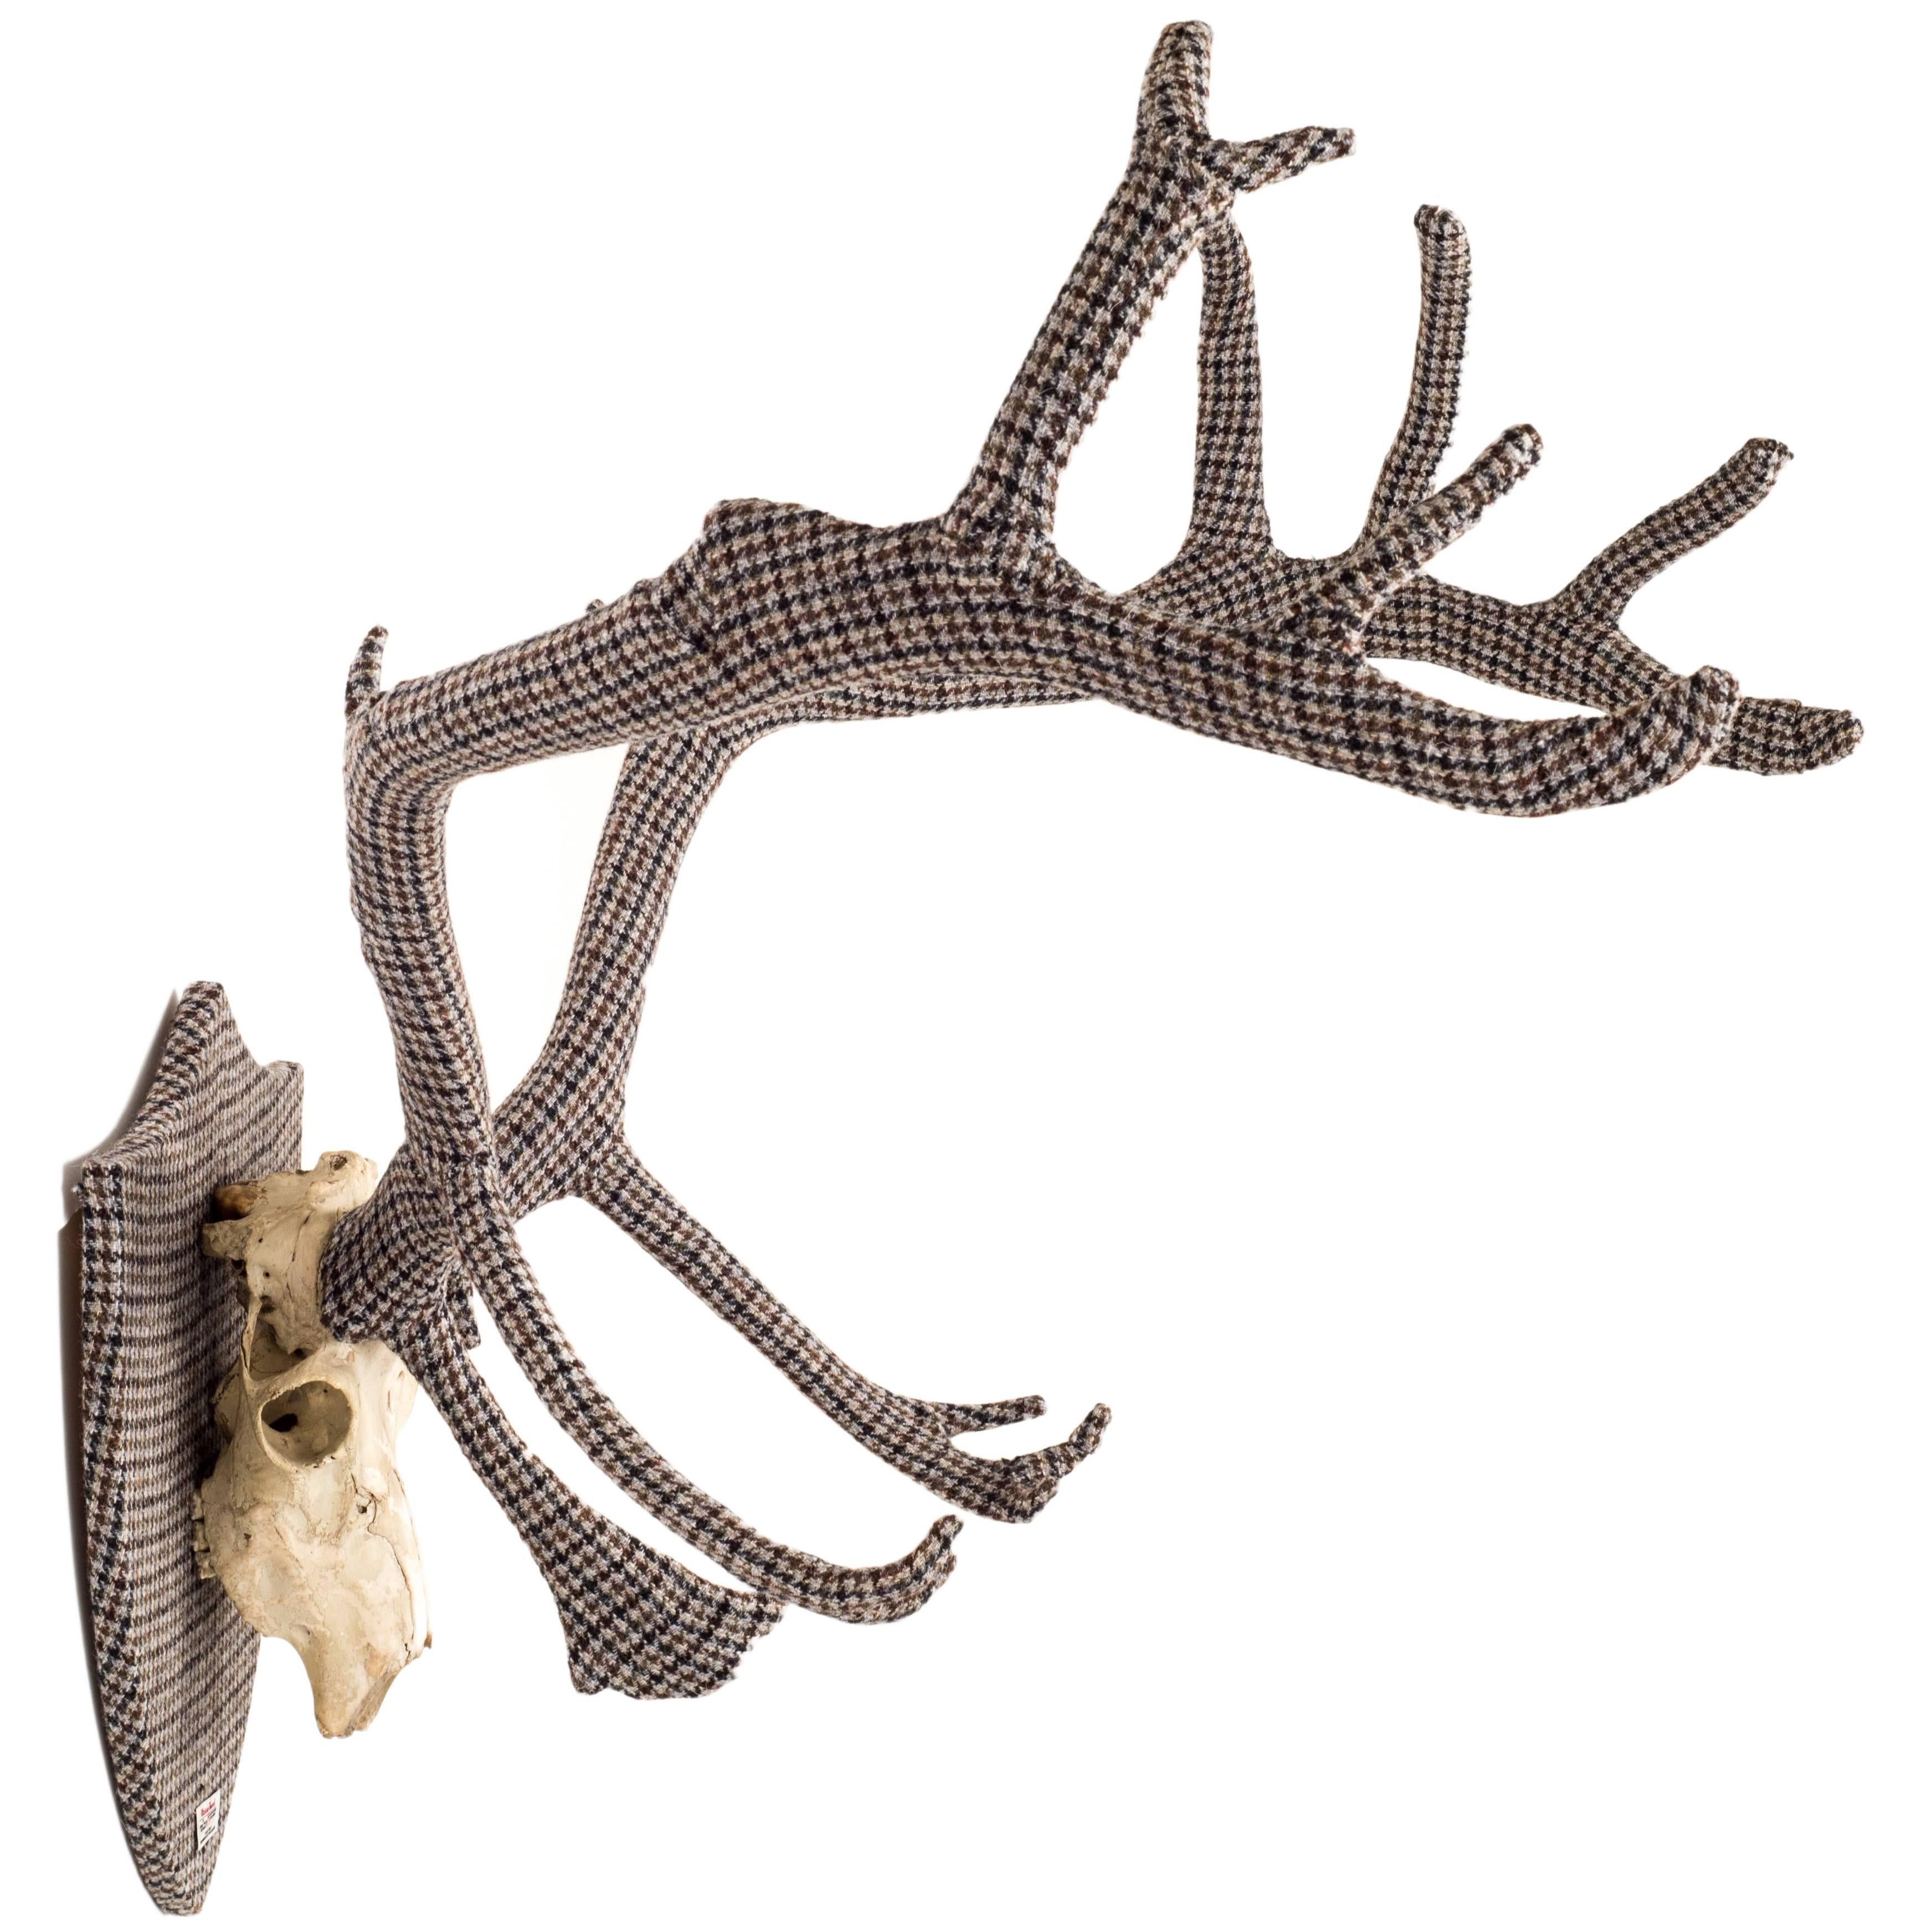 The Eclectic Set of Harris Tweed Wrapped Scottish Deer Antlers. For Sale